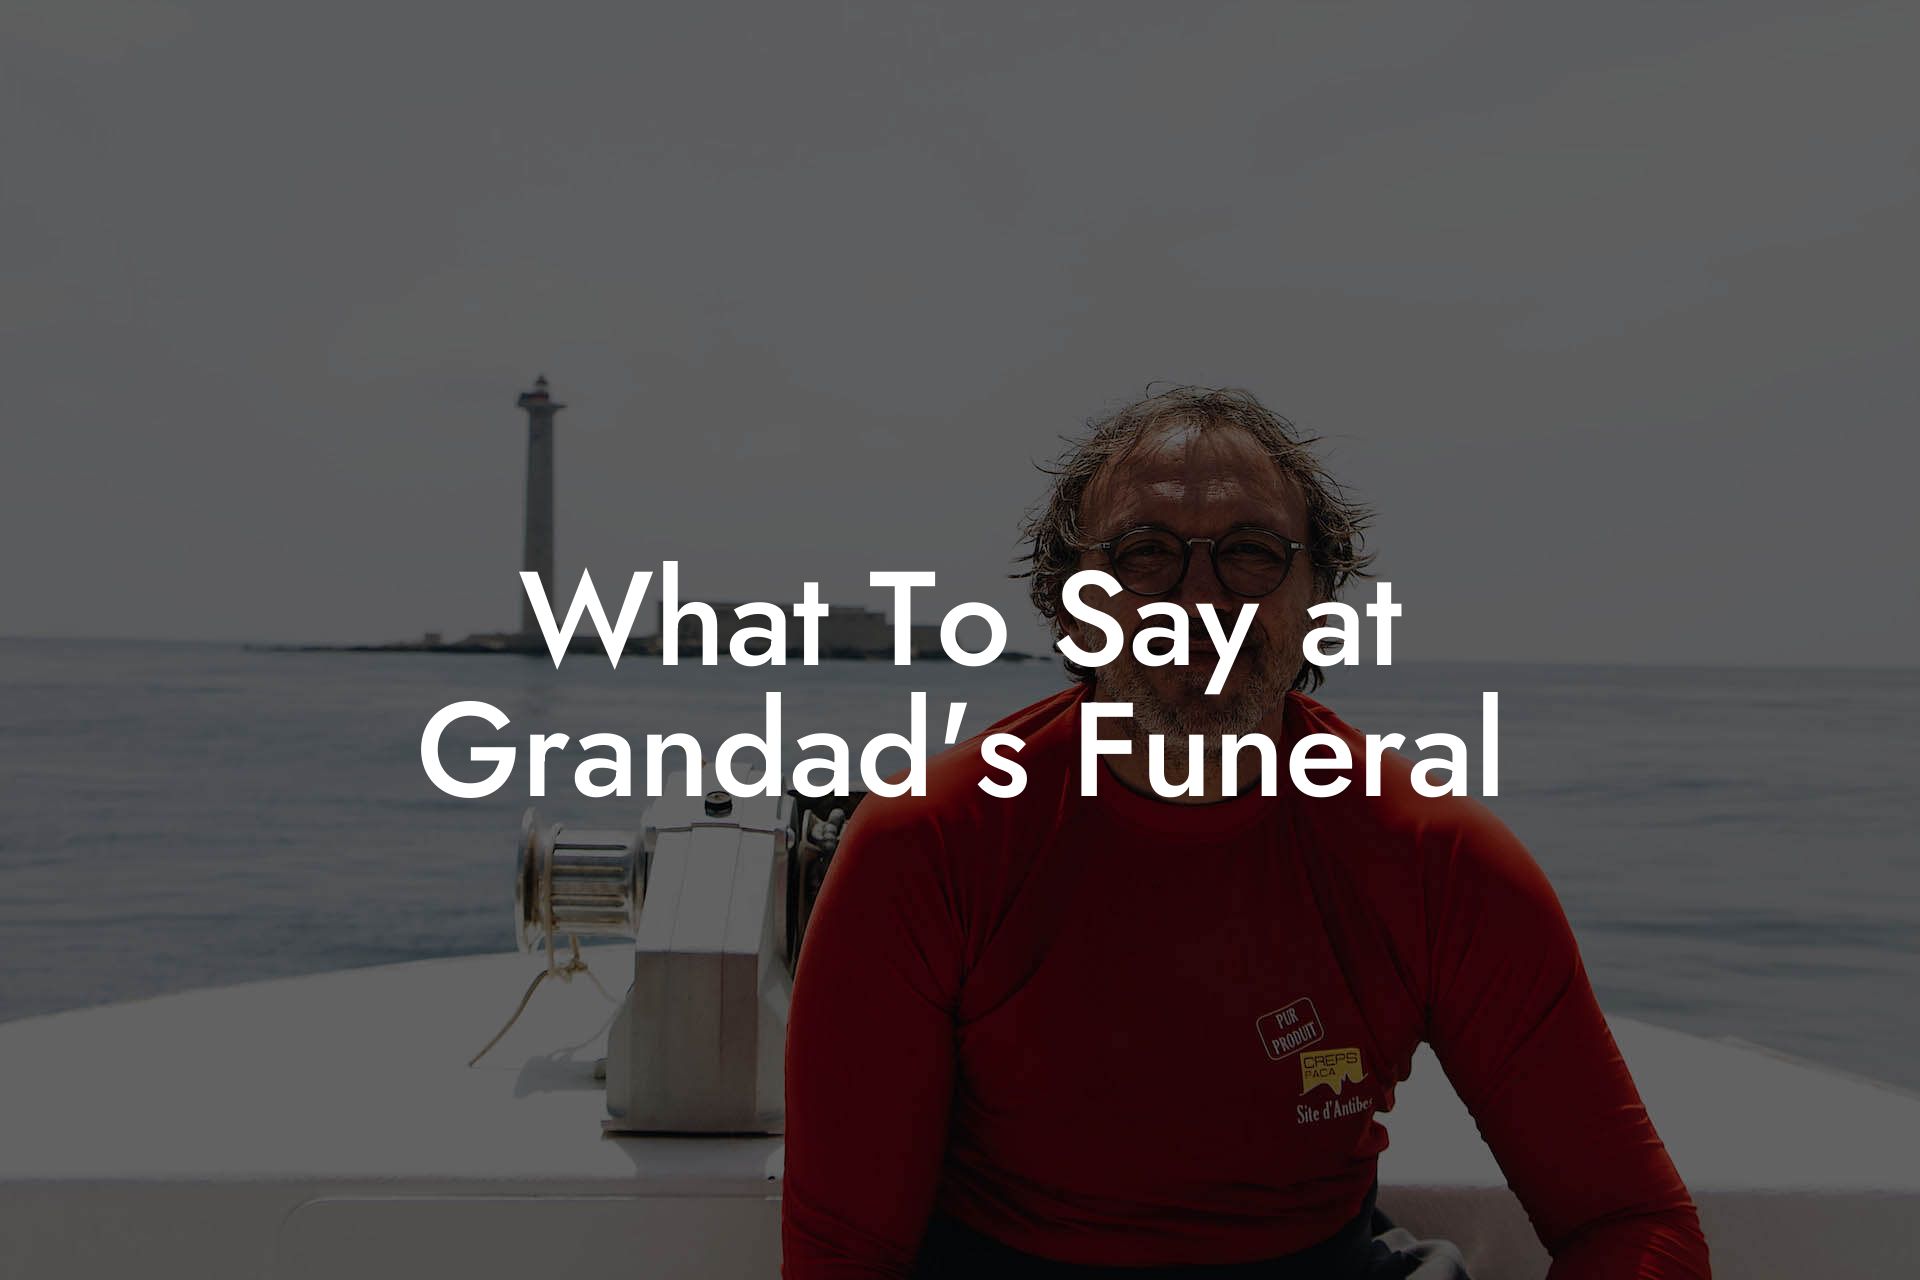 What To Say at Grandad's Funeral